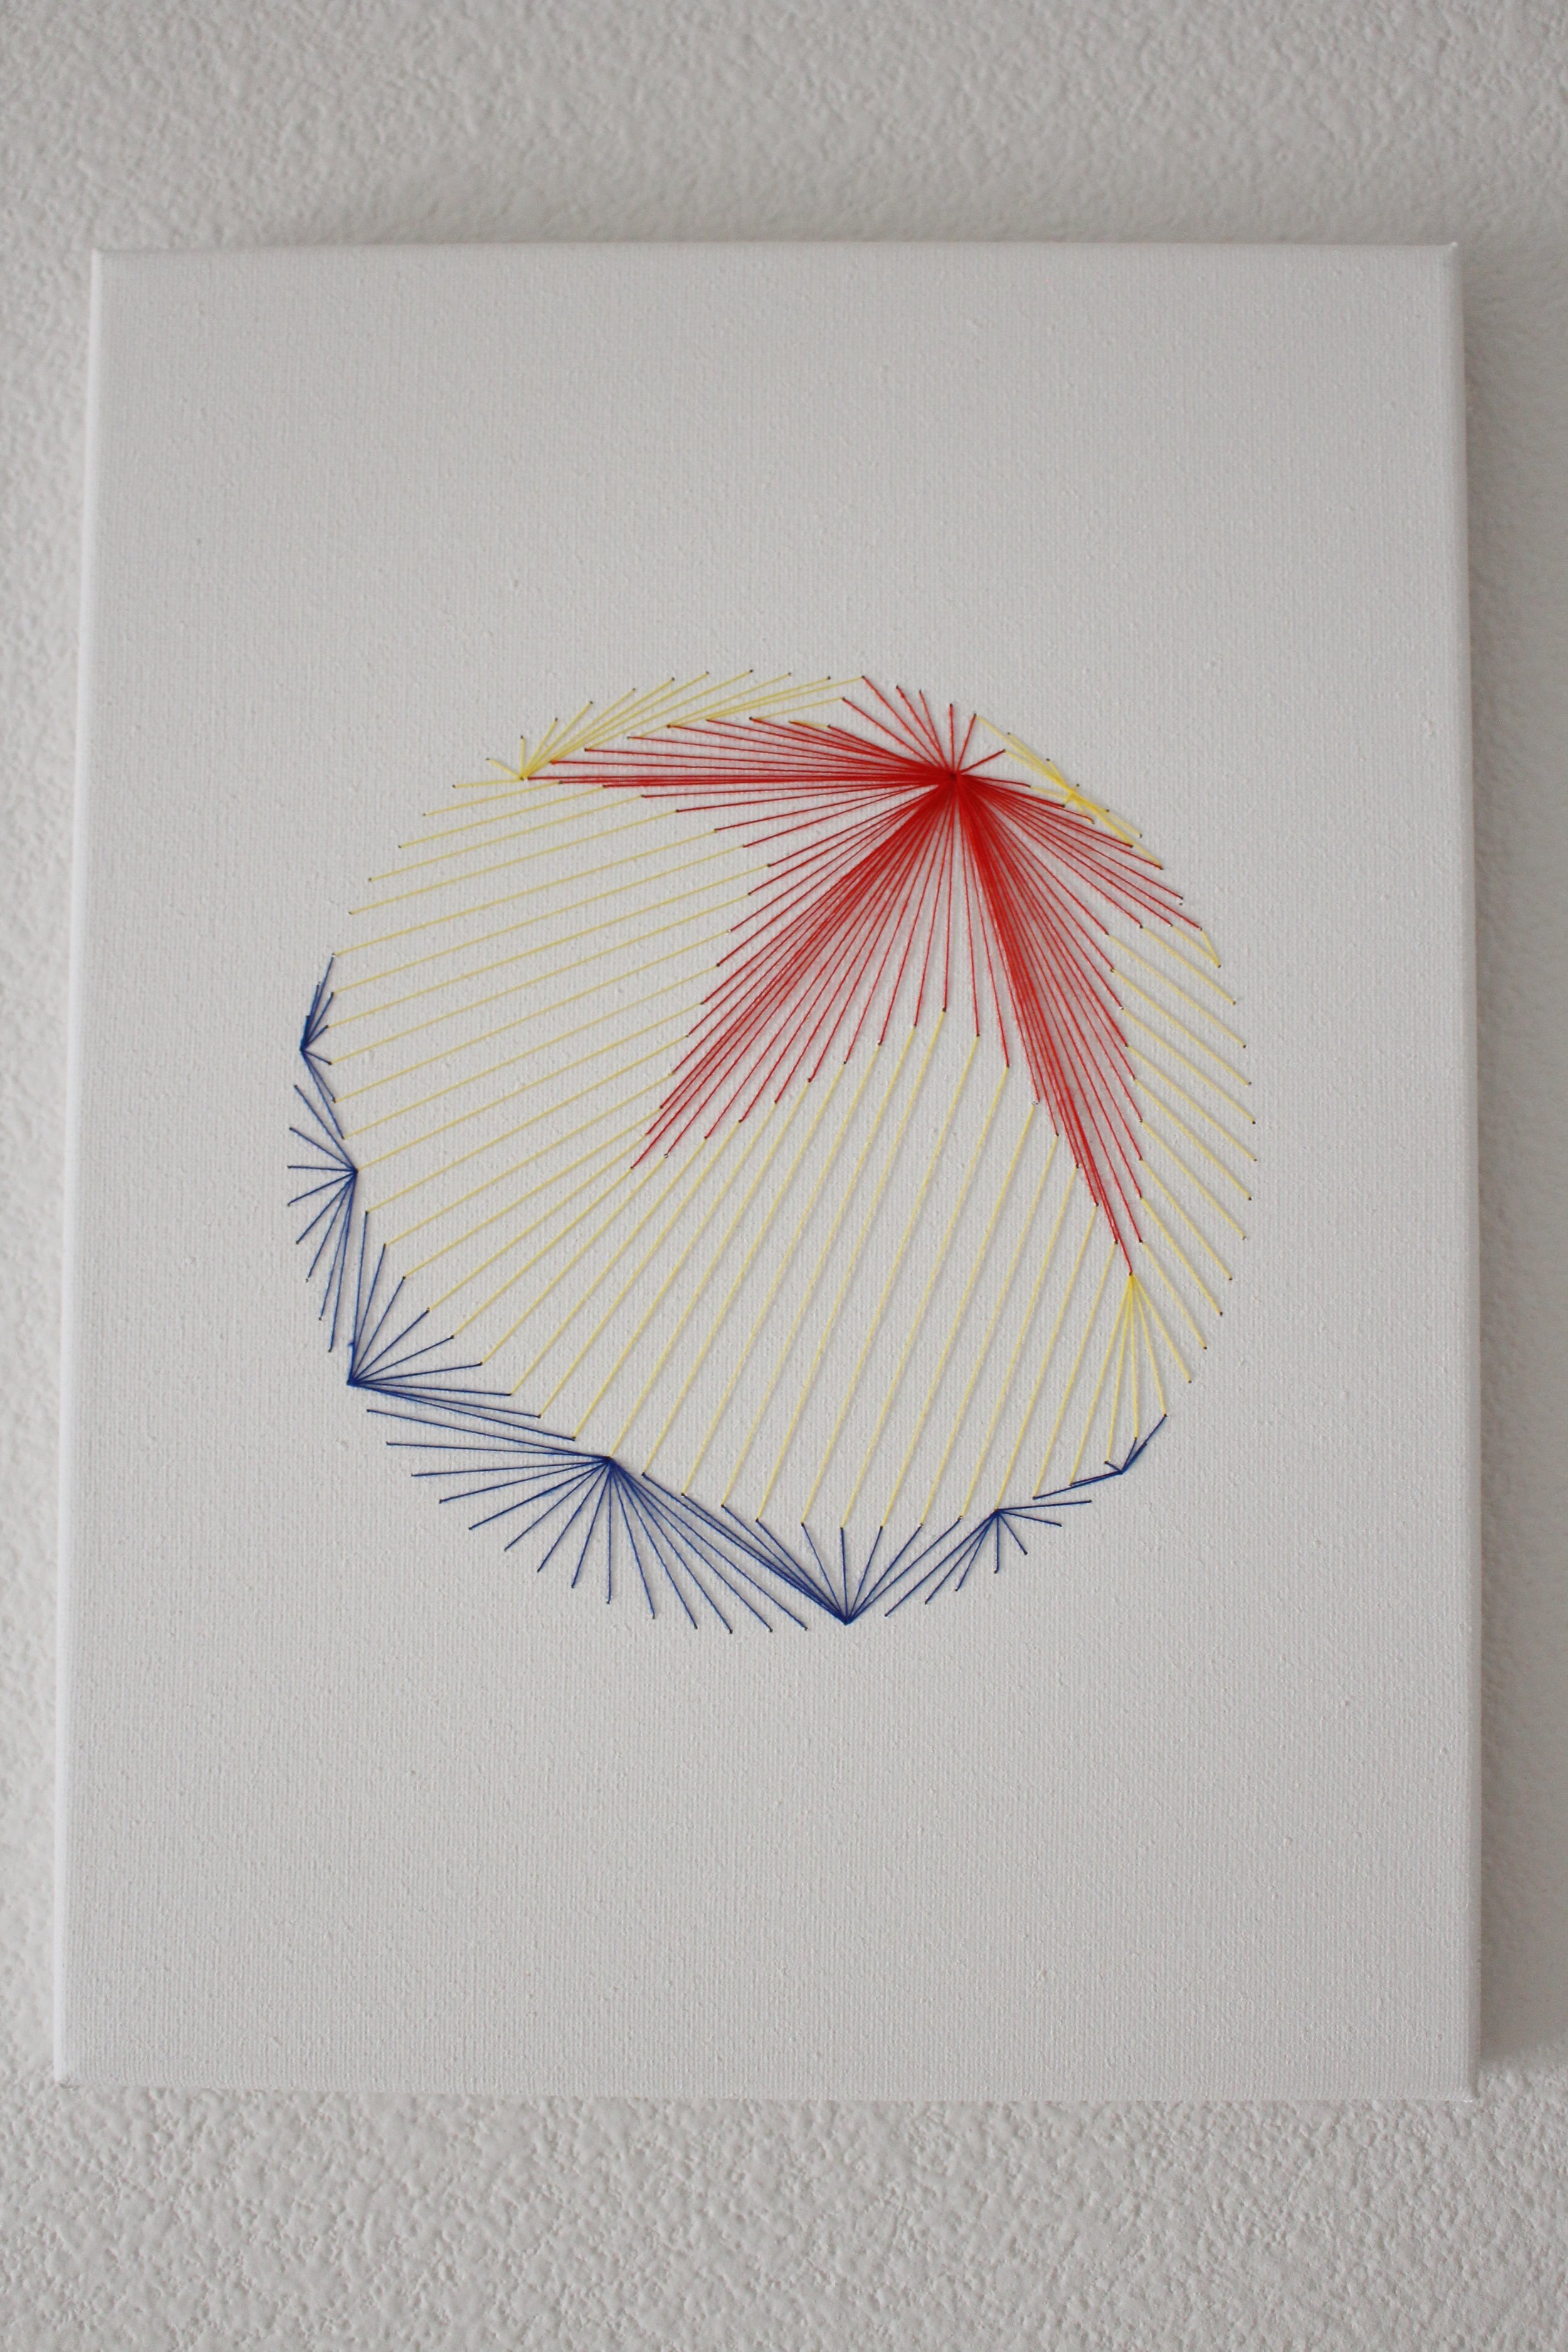  Red, yellow, and blue thread sewn into a canvas in the shape of a Pixar ball 